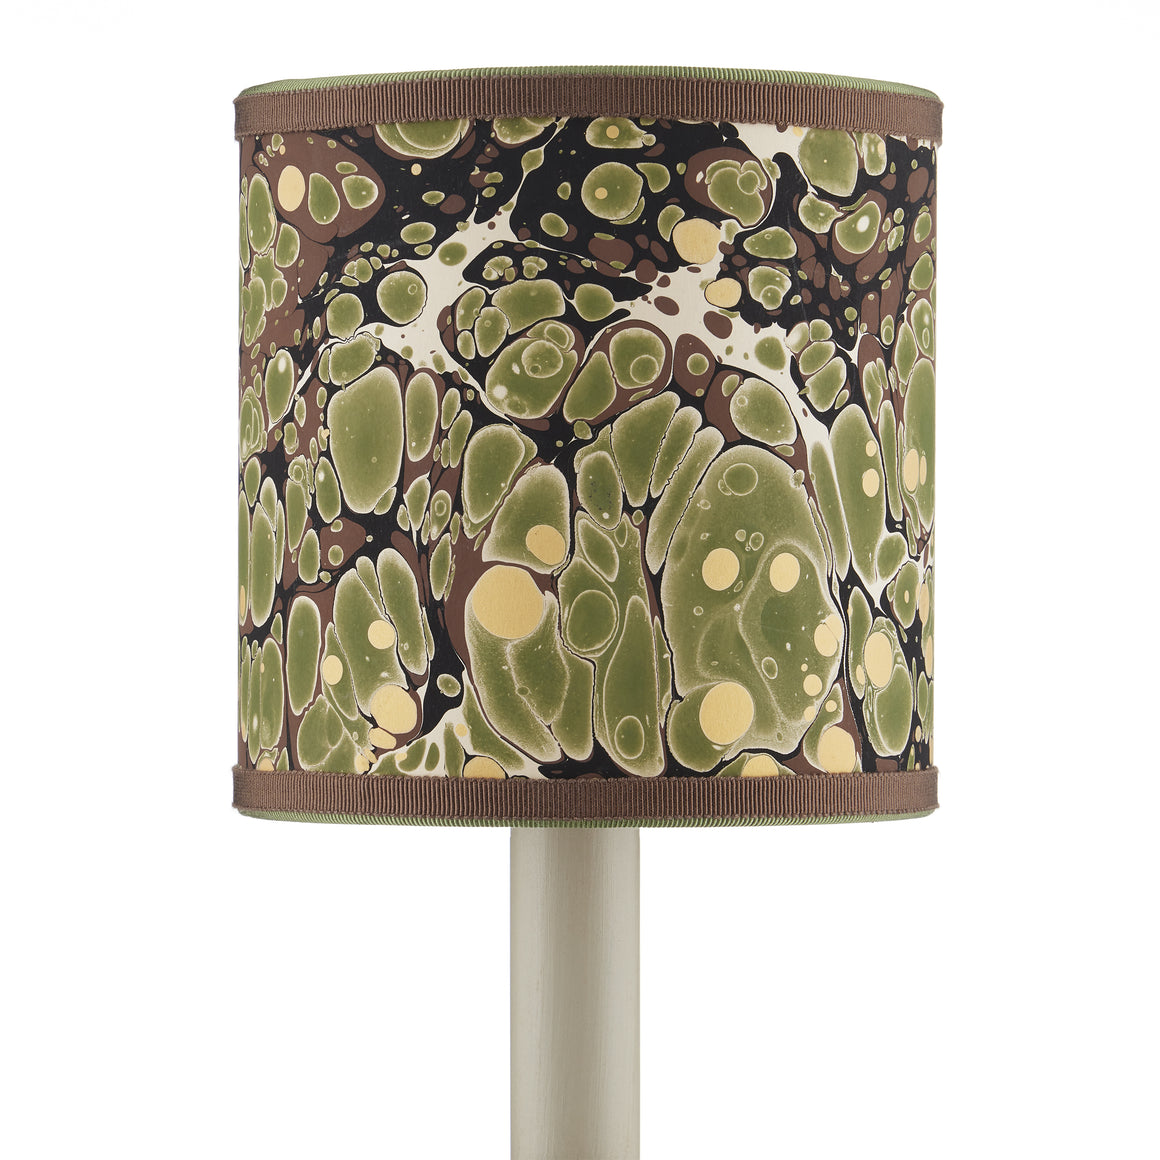 Marble Paper Drum Chandelier Shade - Green/Brown/Gold